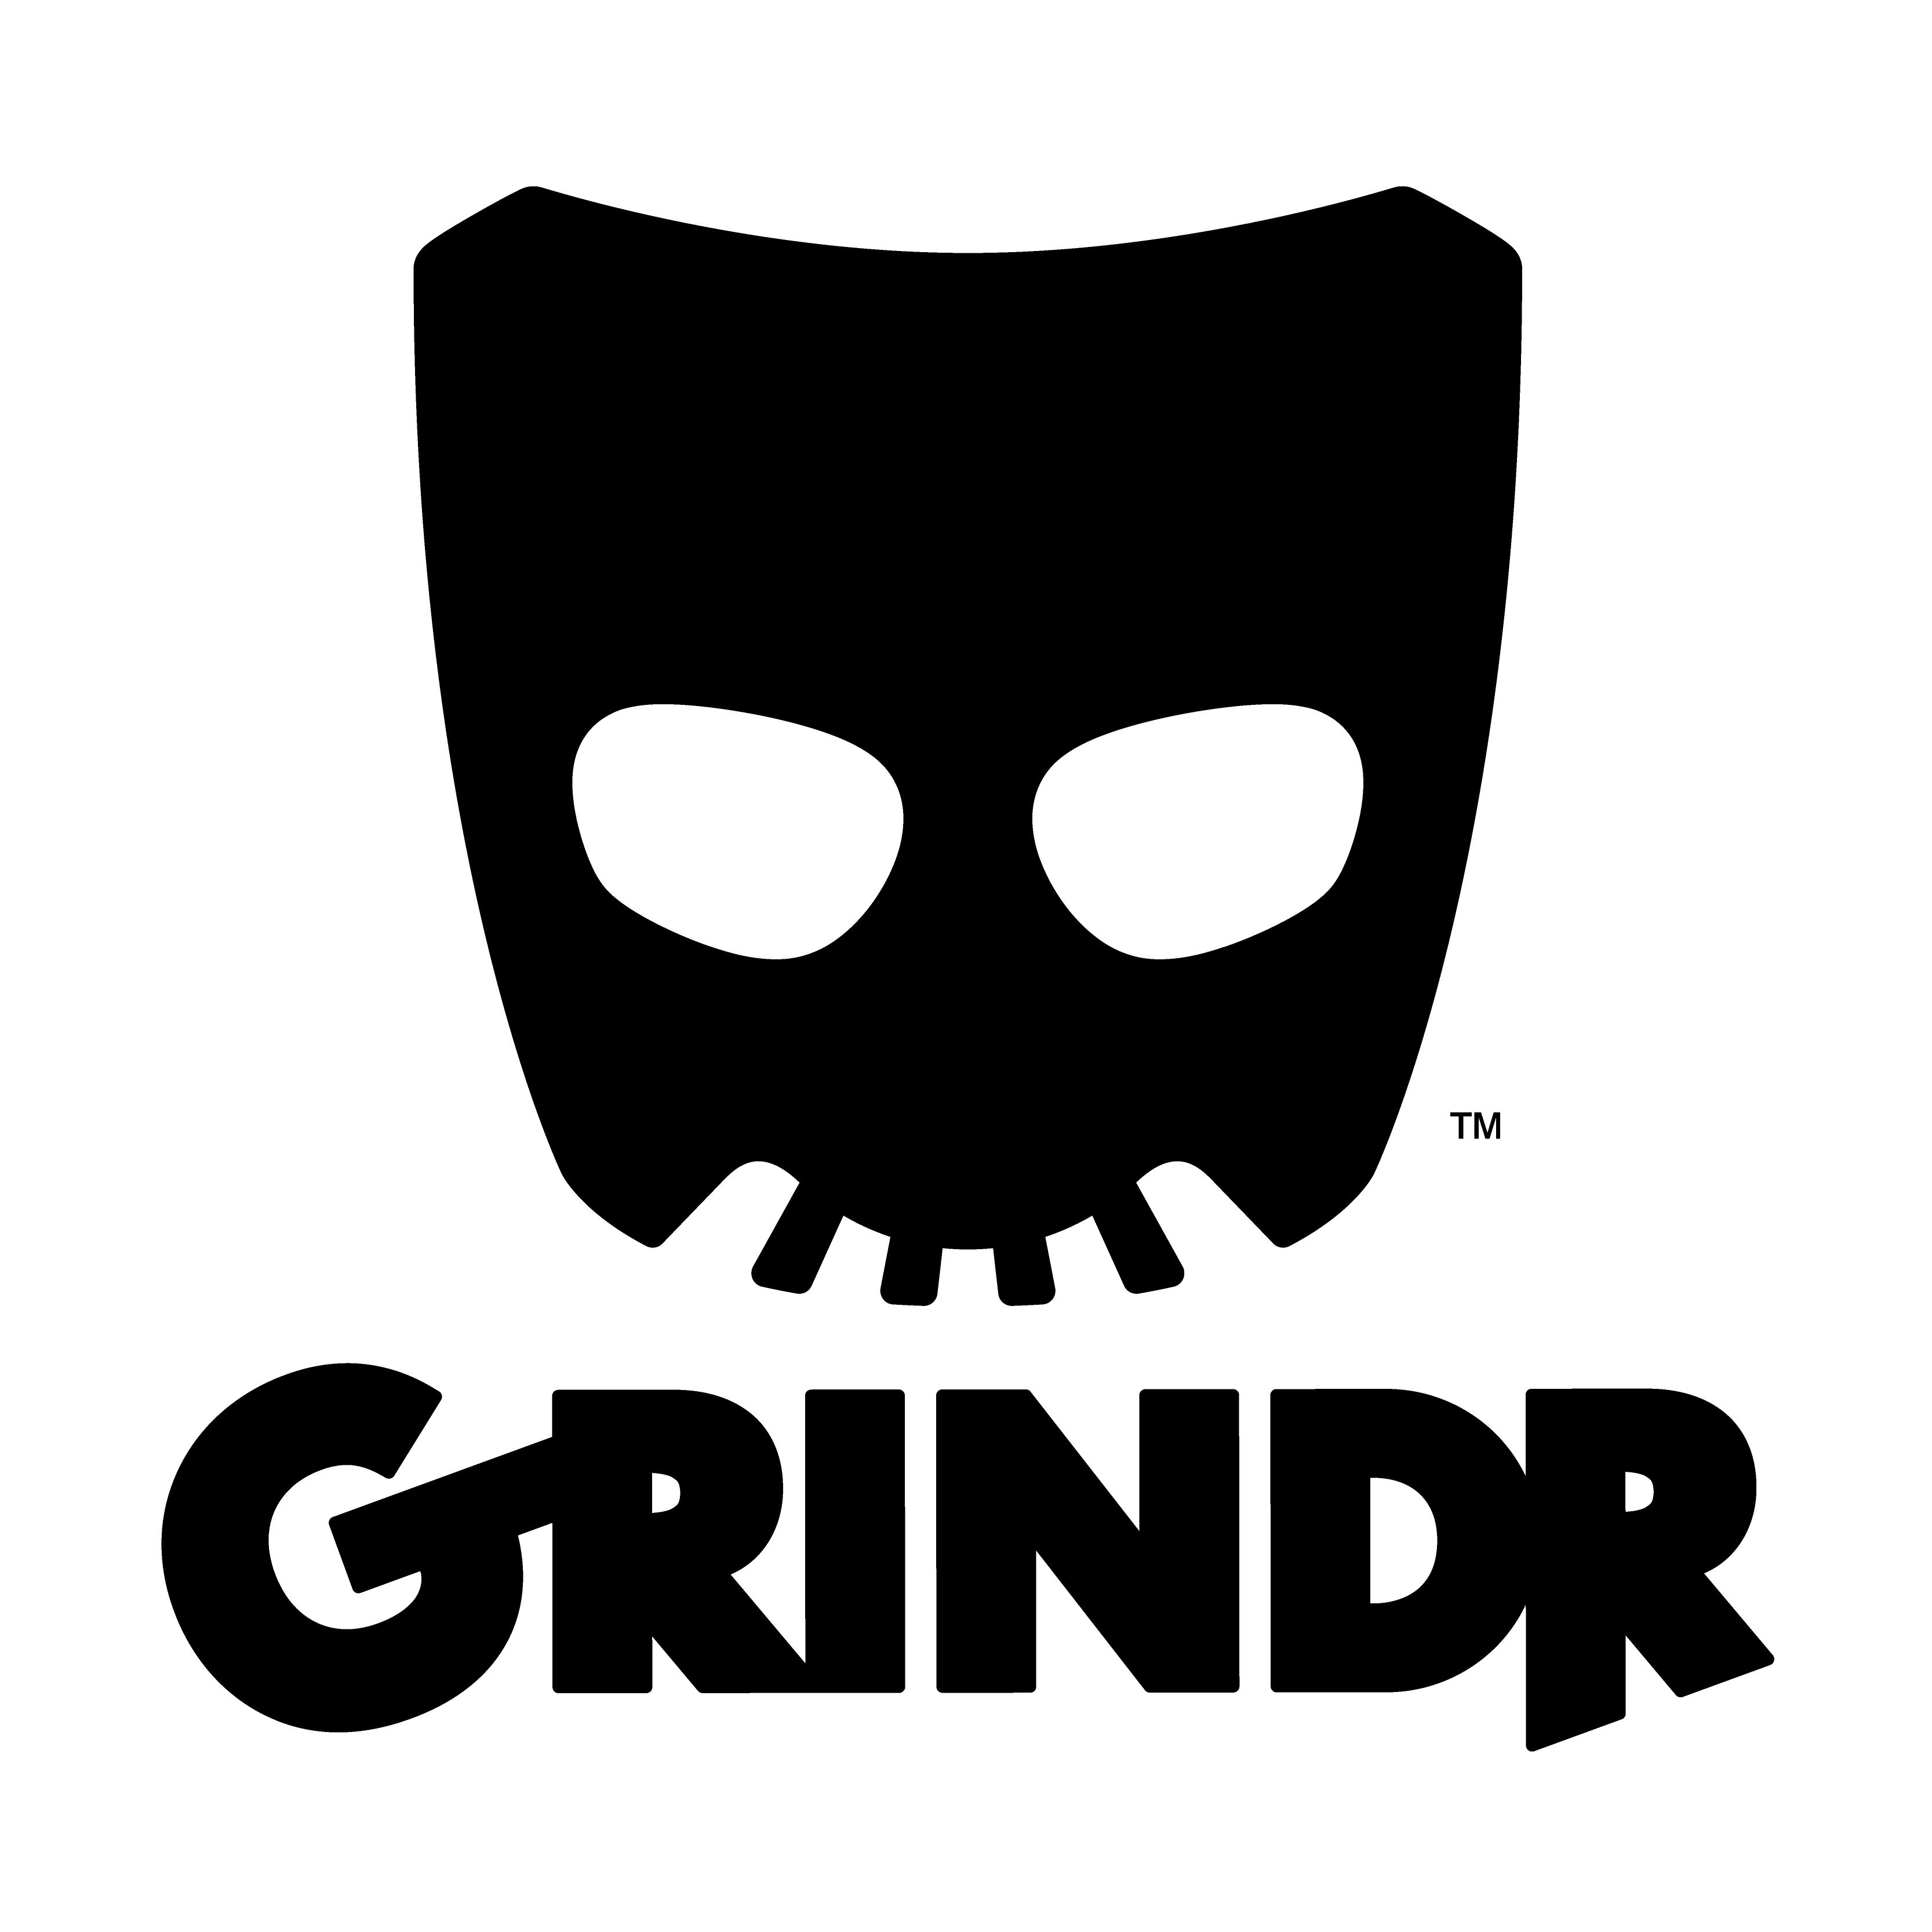 Gindr Logo - Out of the Closet Thrift Stores - Grindr-Logo-300dpi -